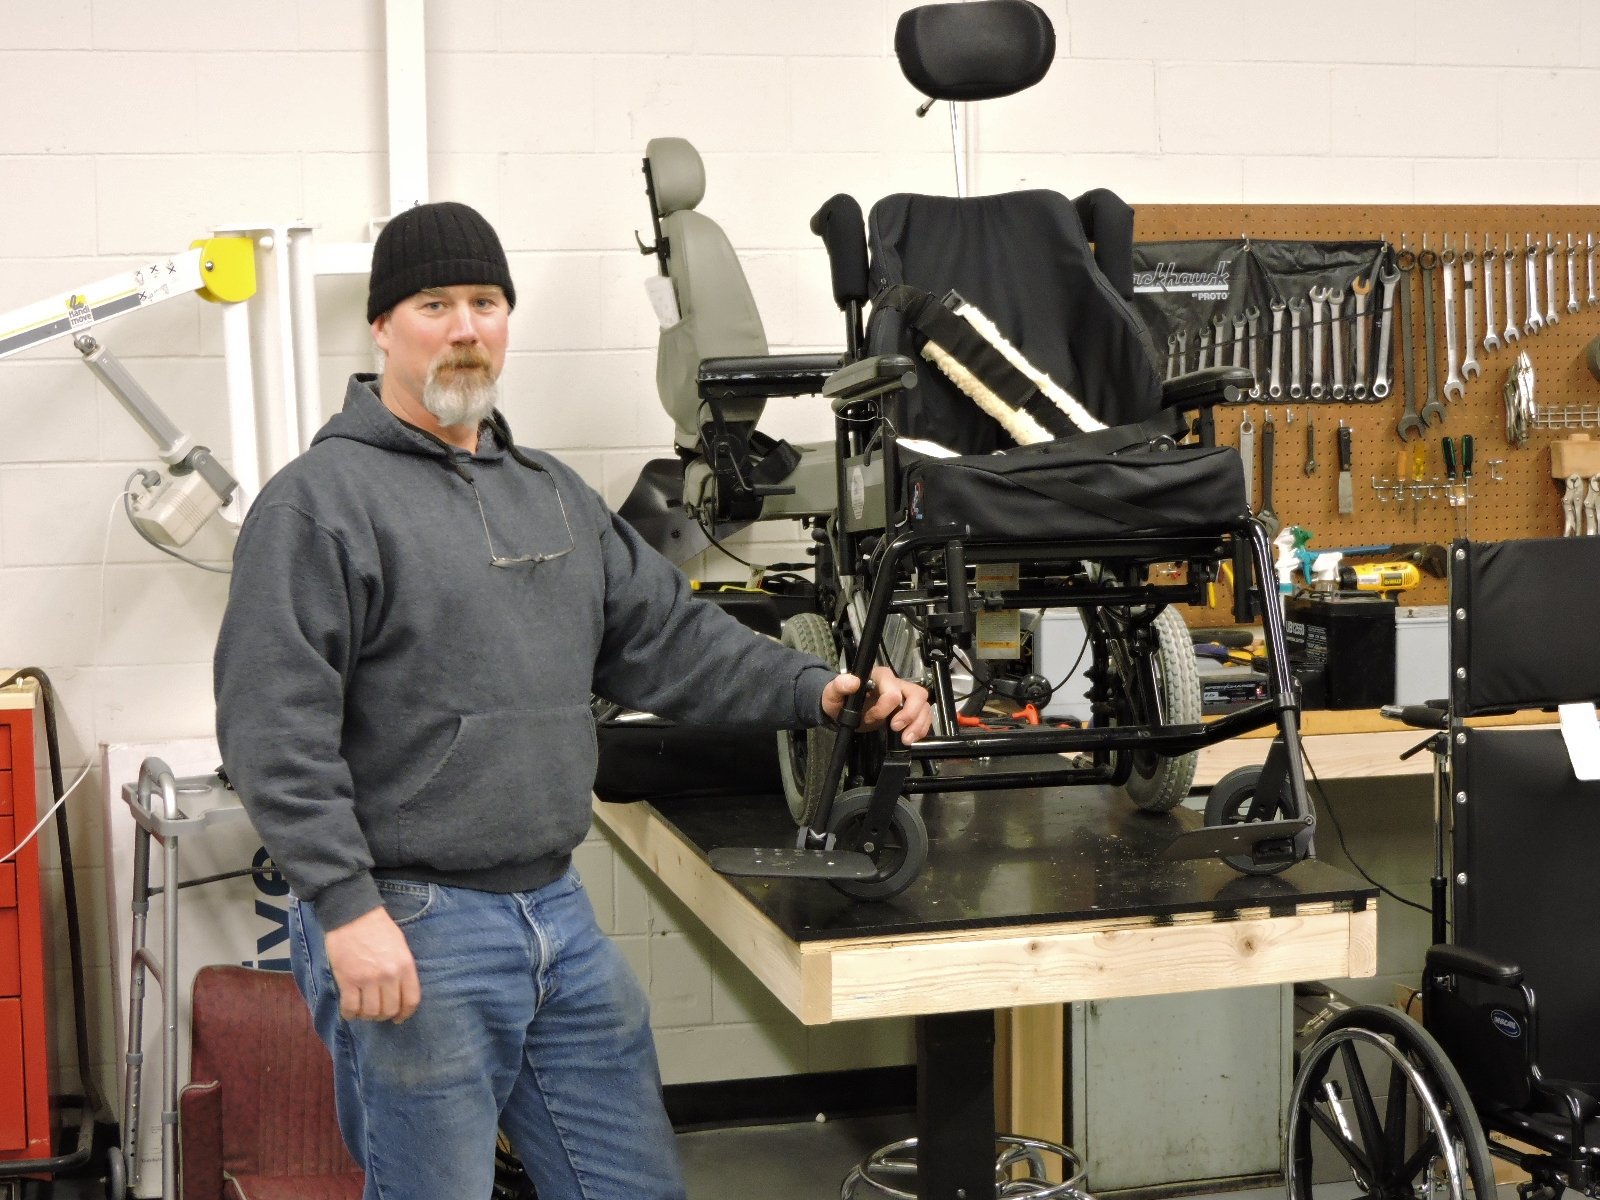 A man wearing jeans and a knit cap stands next to a work bench holding two wheelchairs. Tools are mounted on the wall behind.